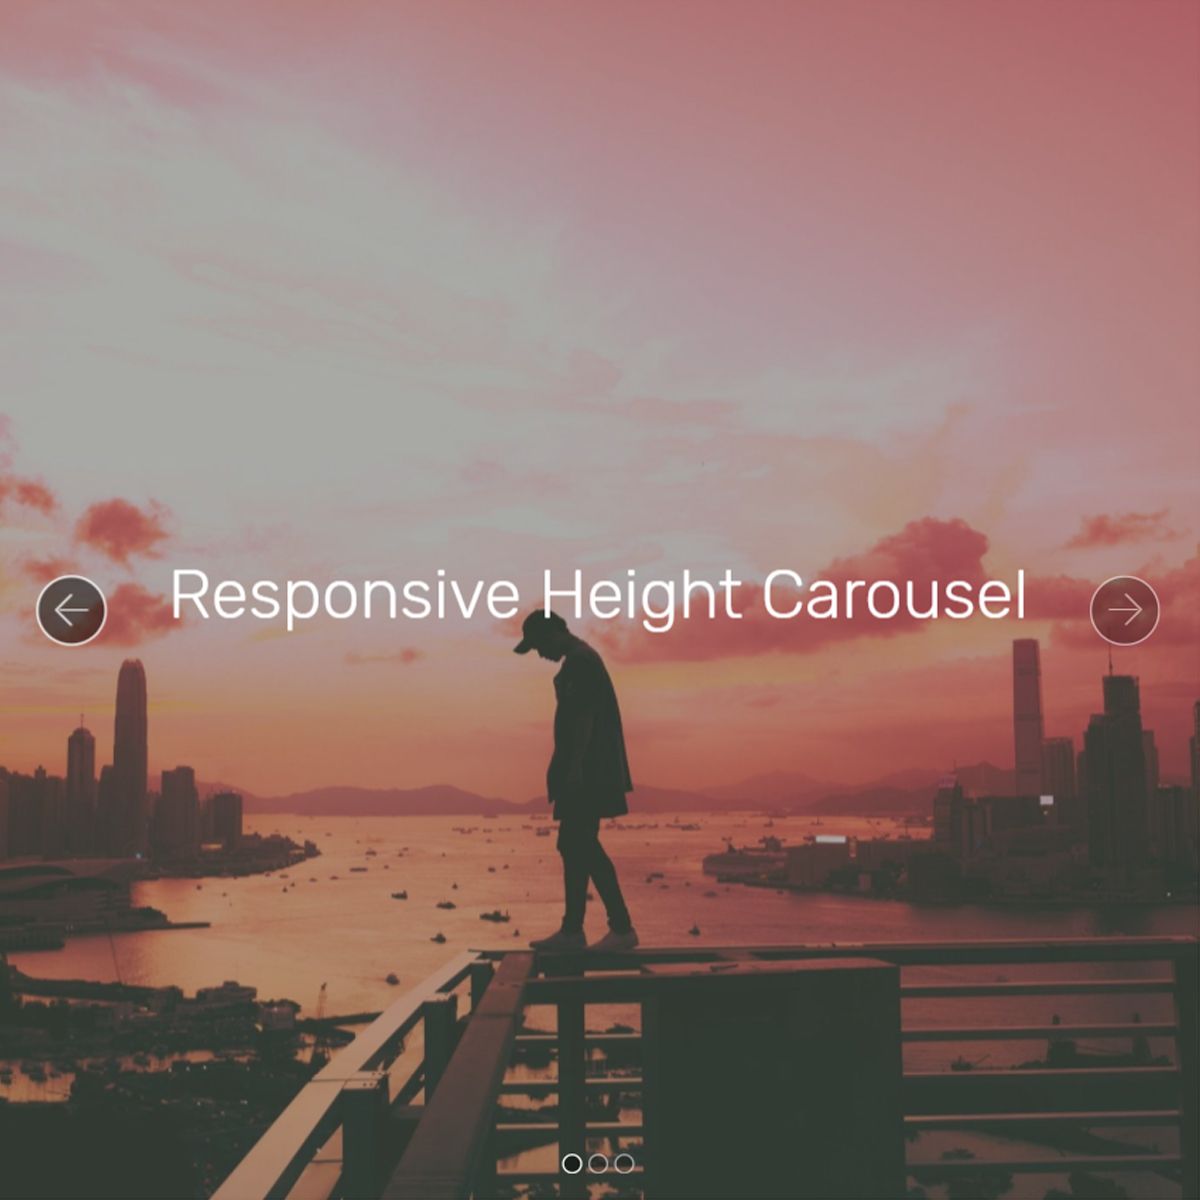 HTML5 Bootstrap Picture Carousel